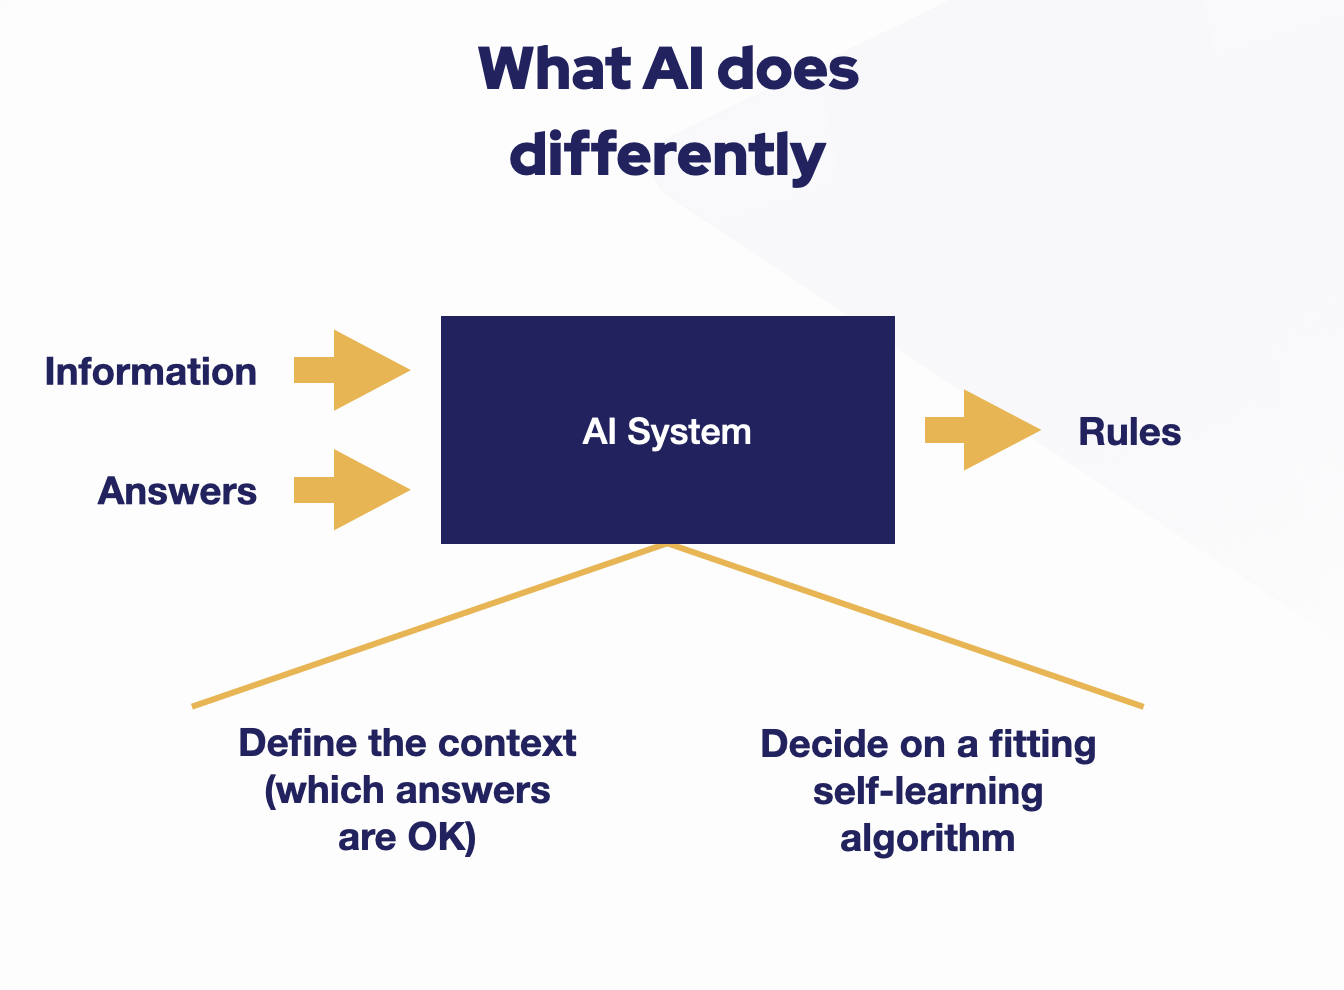 what is AI and why is it different